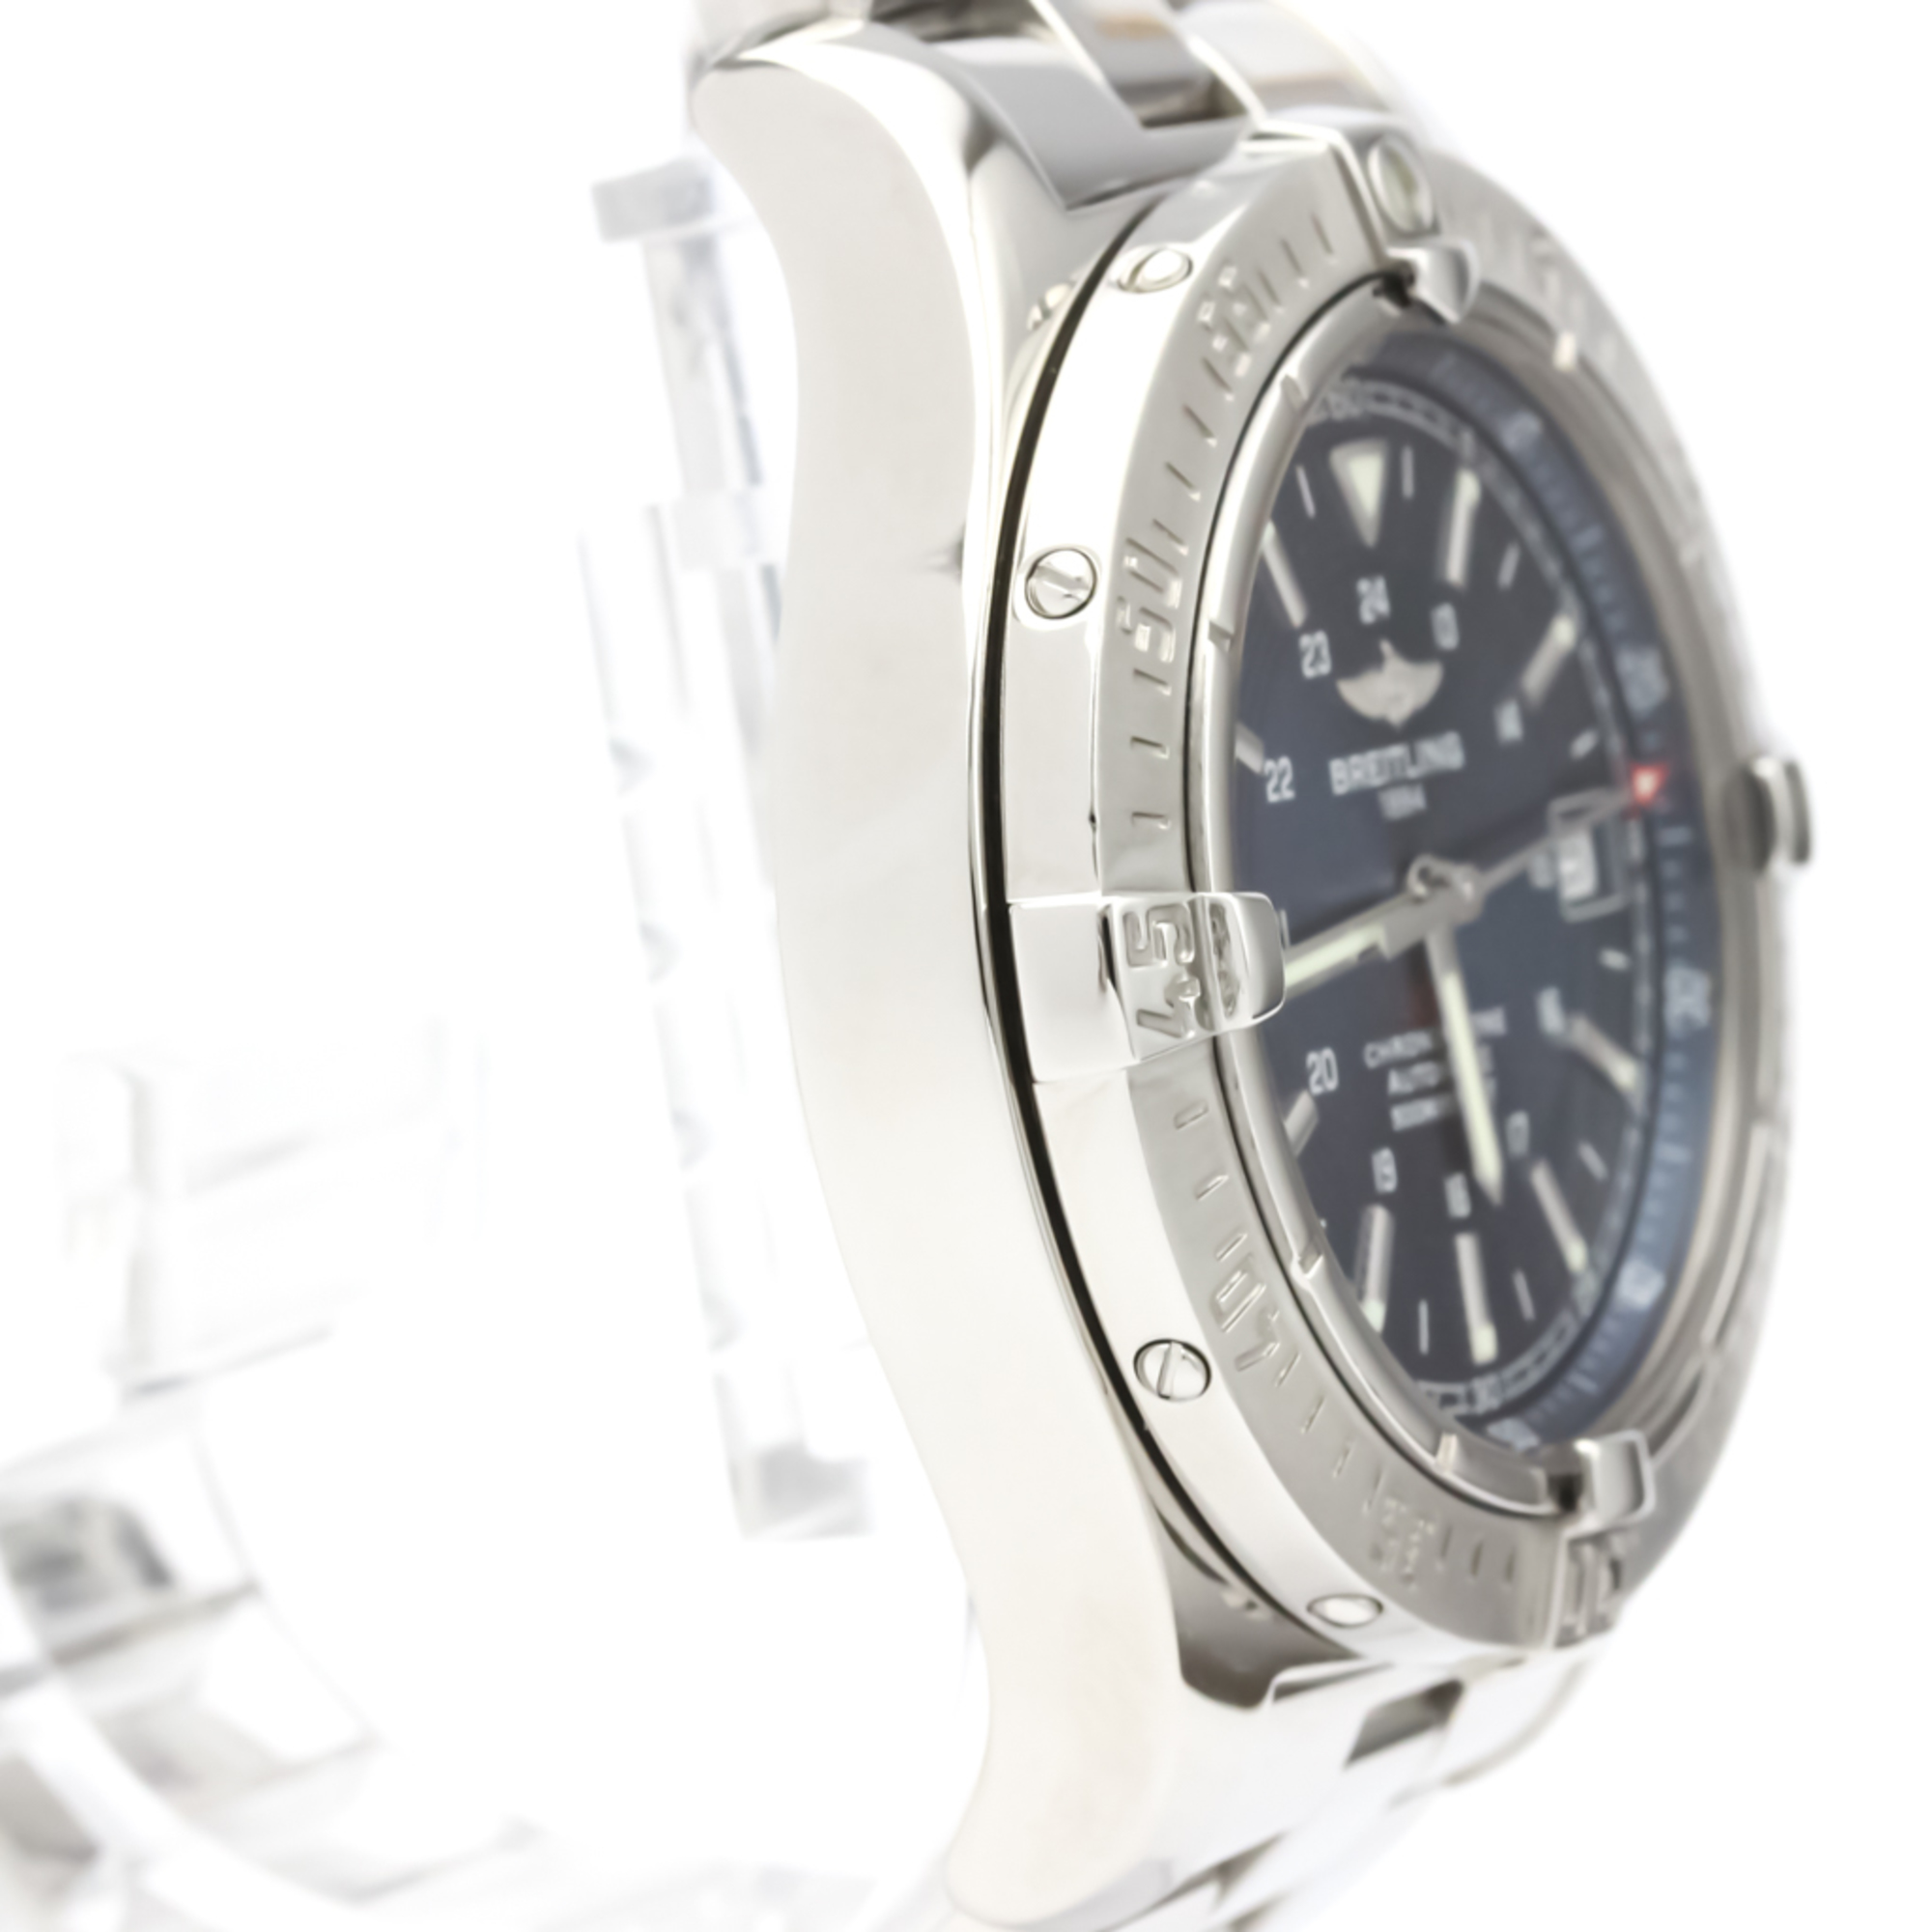 BREITLING Colt Stainless Steel Automatic Mens Watch A17380